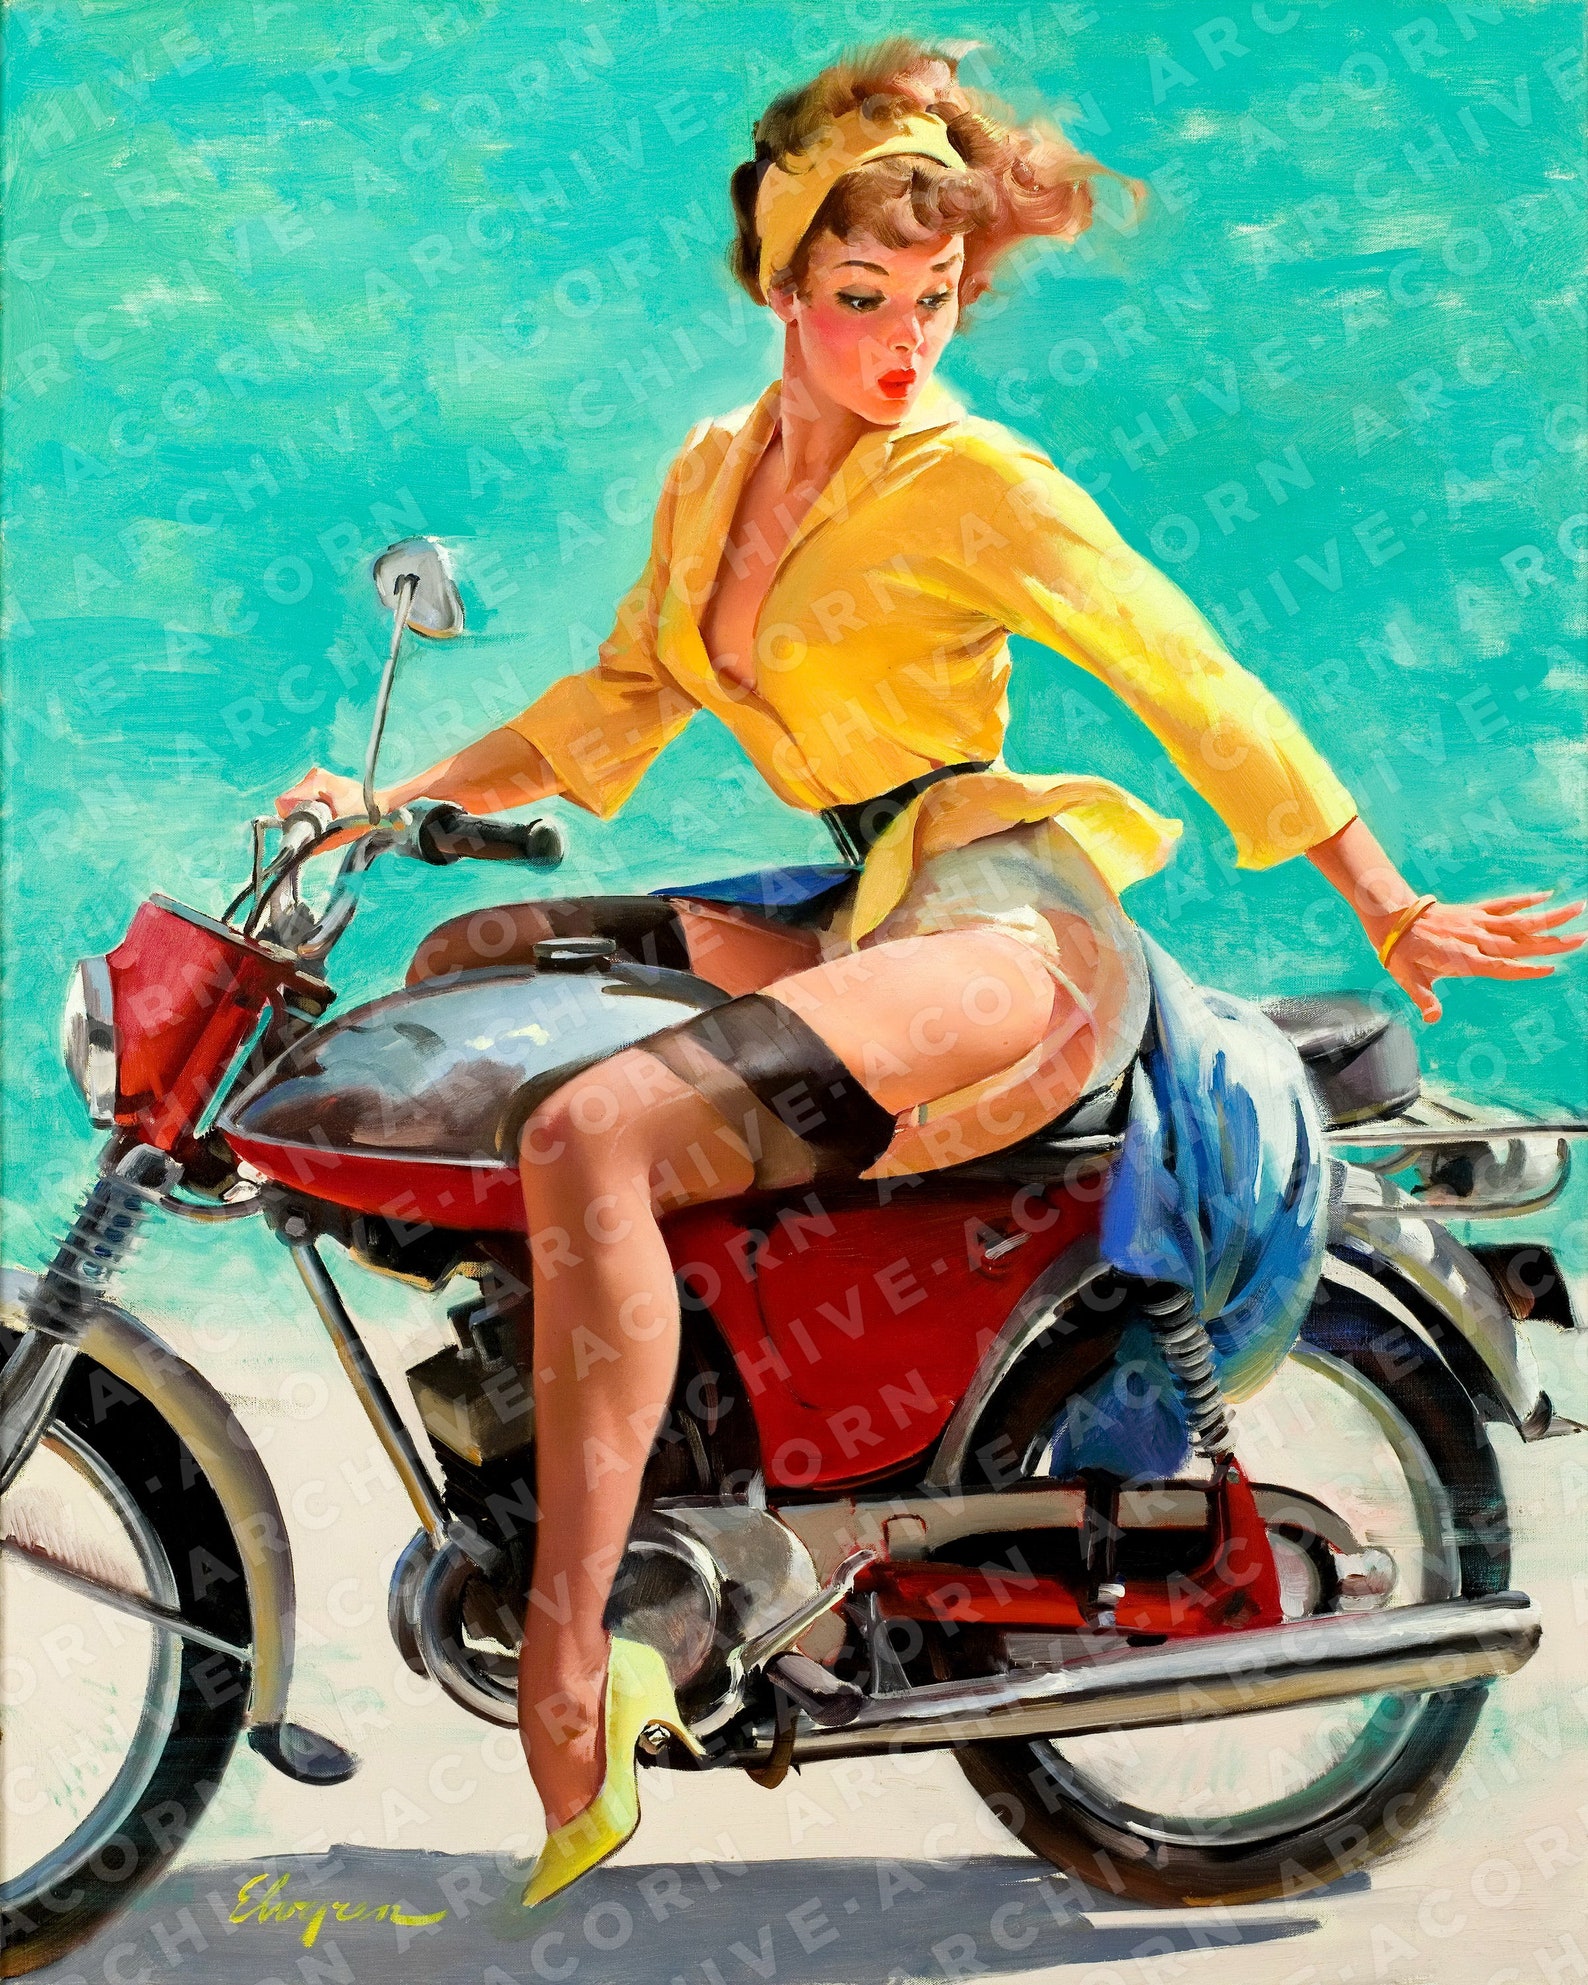 Pin Up Motorcycle Girl Hi Res 300 Dpi 8 X 10 Inches In Etsy